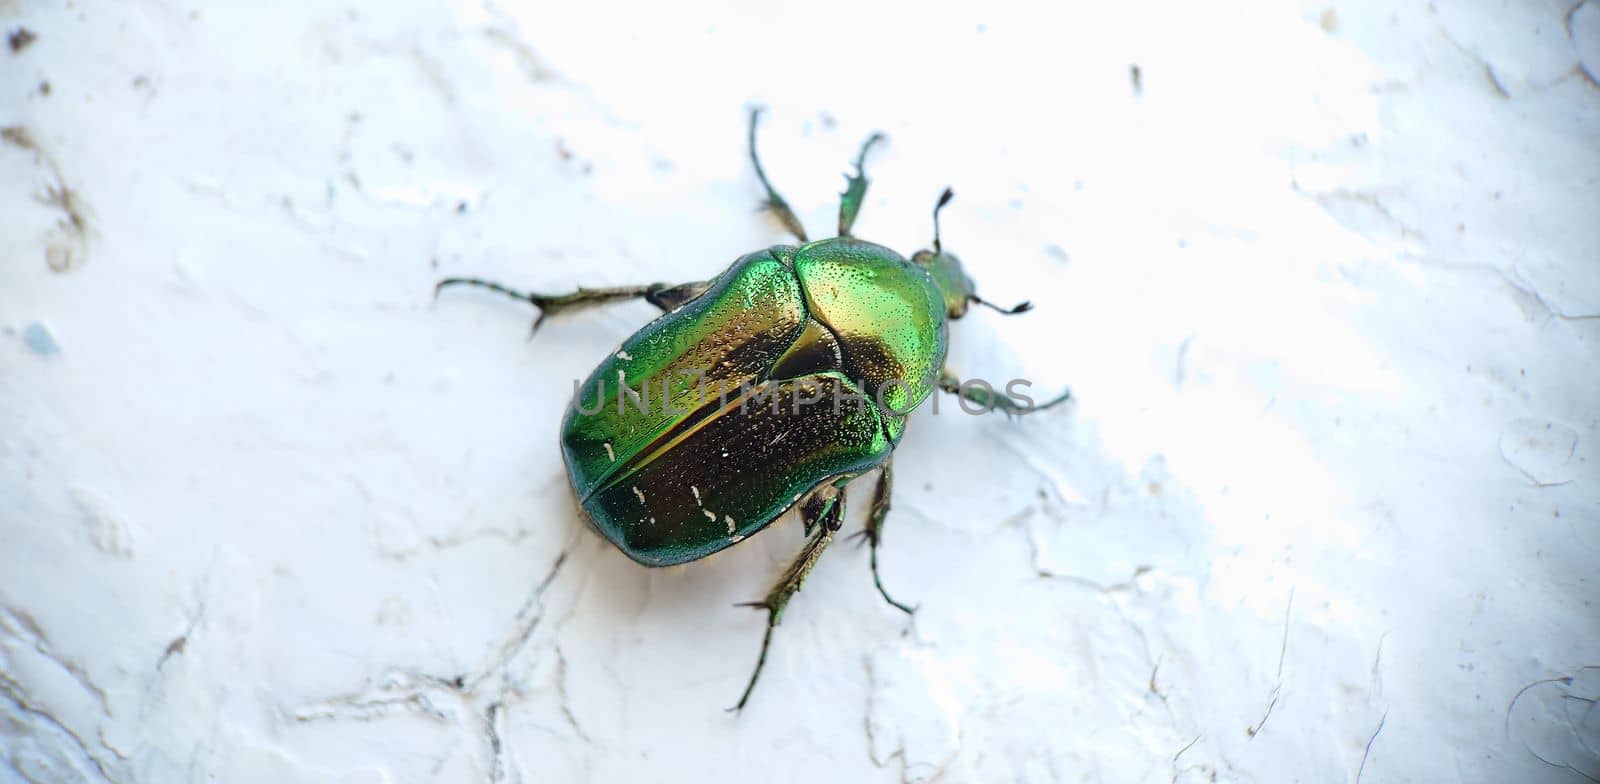 Macrophotography.A large green beetle on an old cracked wooden surface.Texture or background.Selective focus.